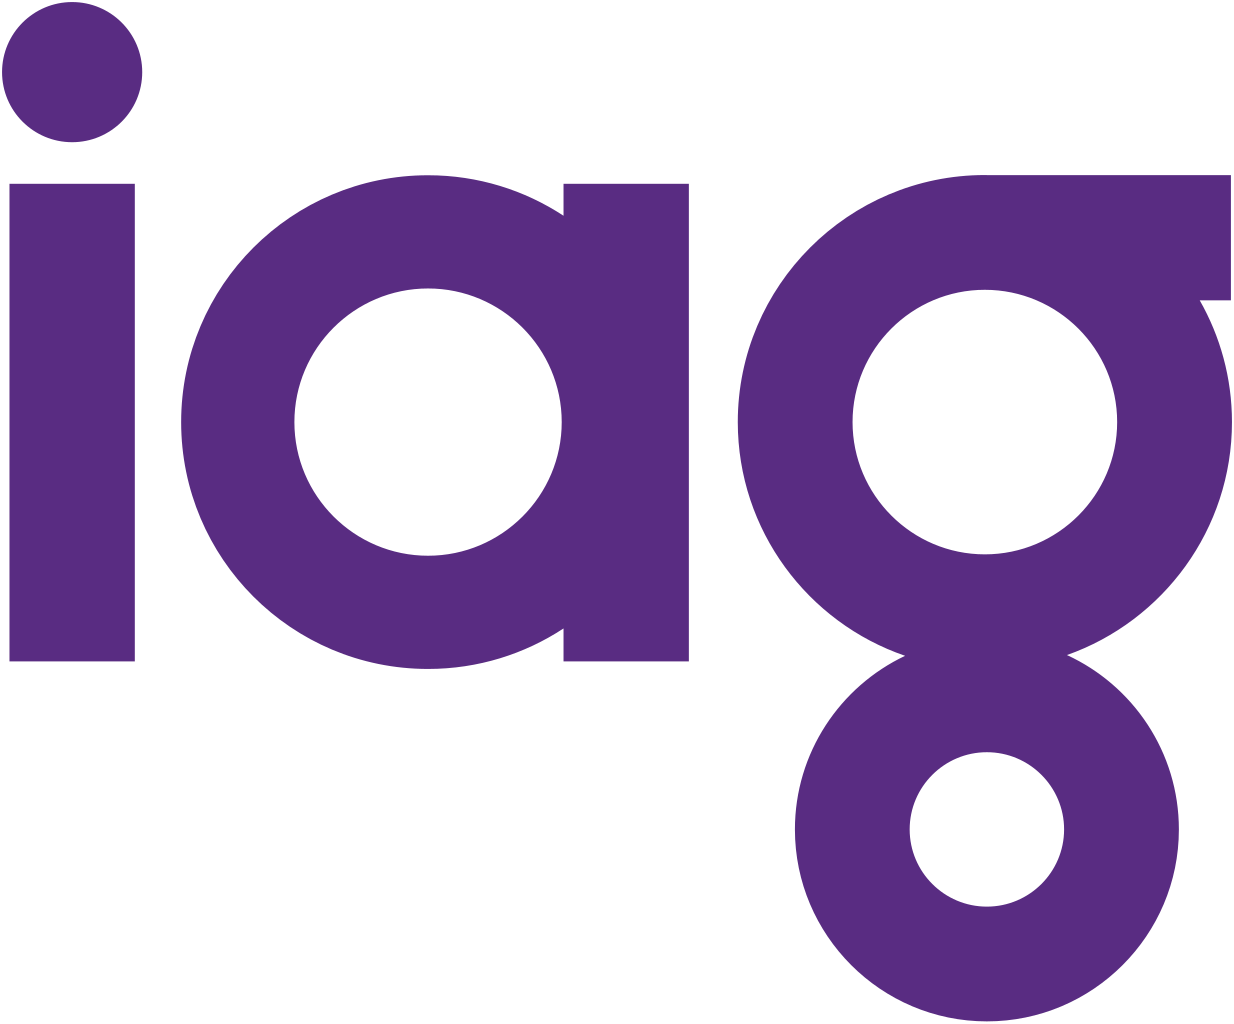 IAG expands catastrophe reinsurance to $9 billion of coverage